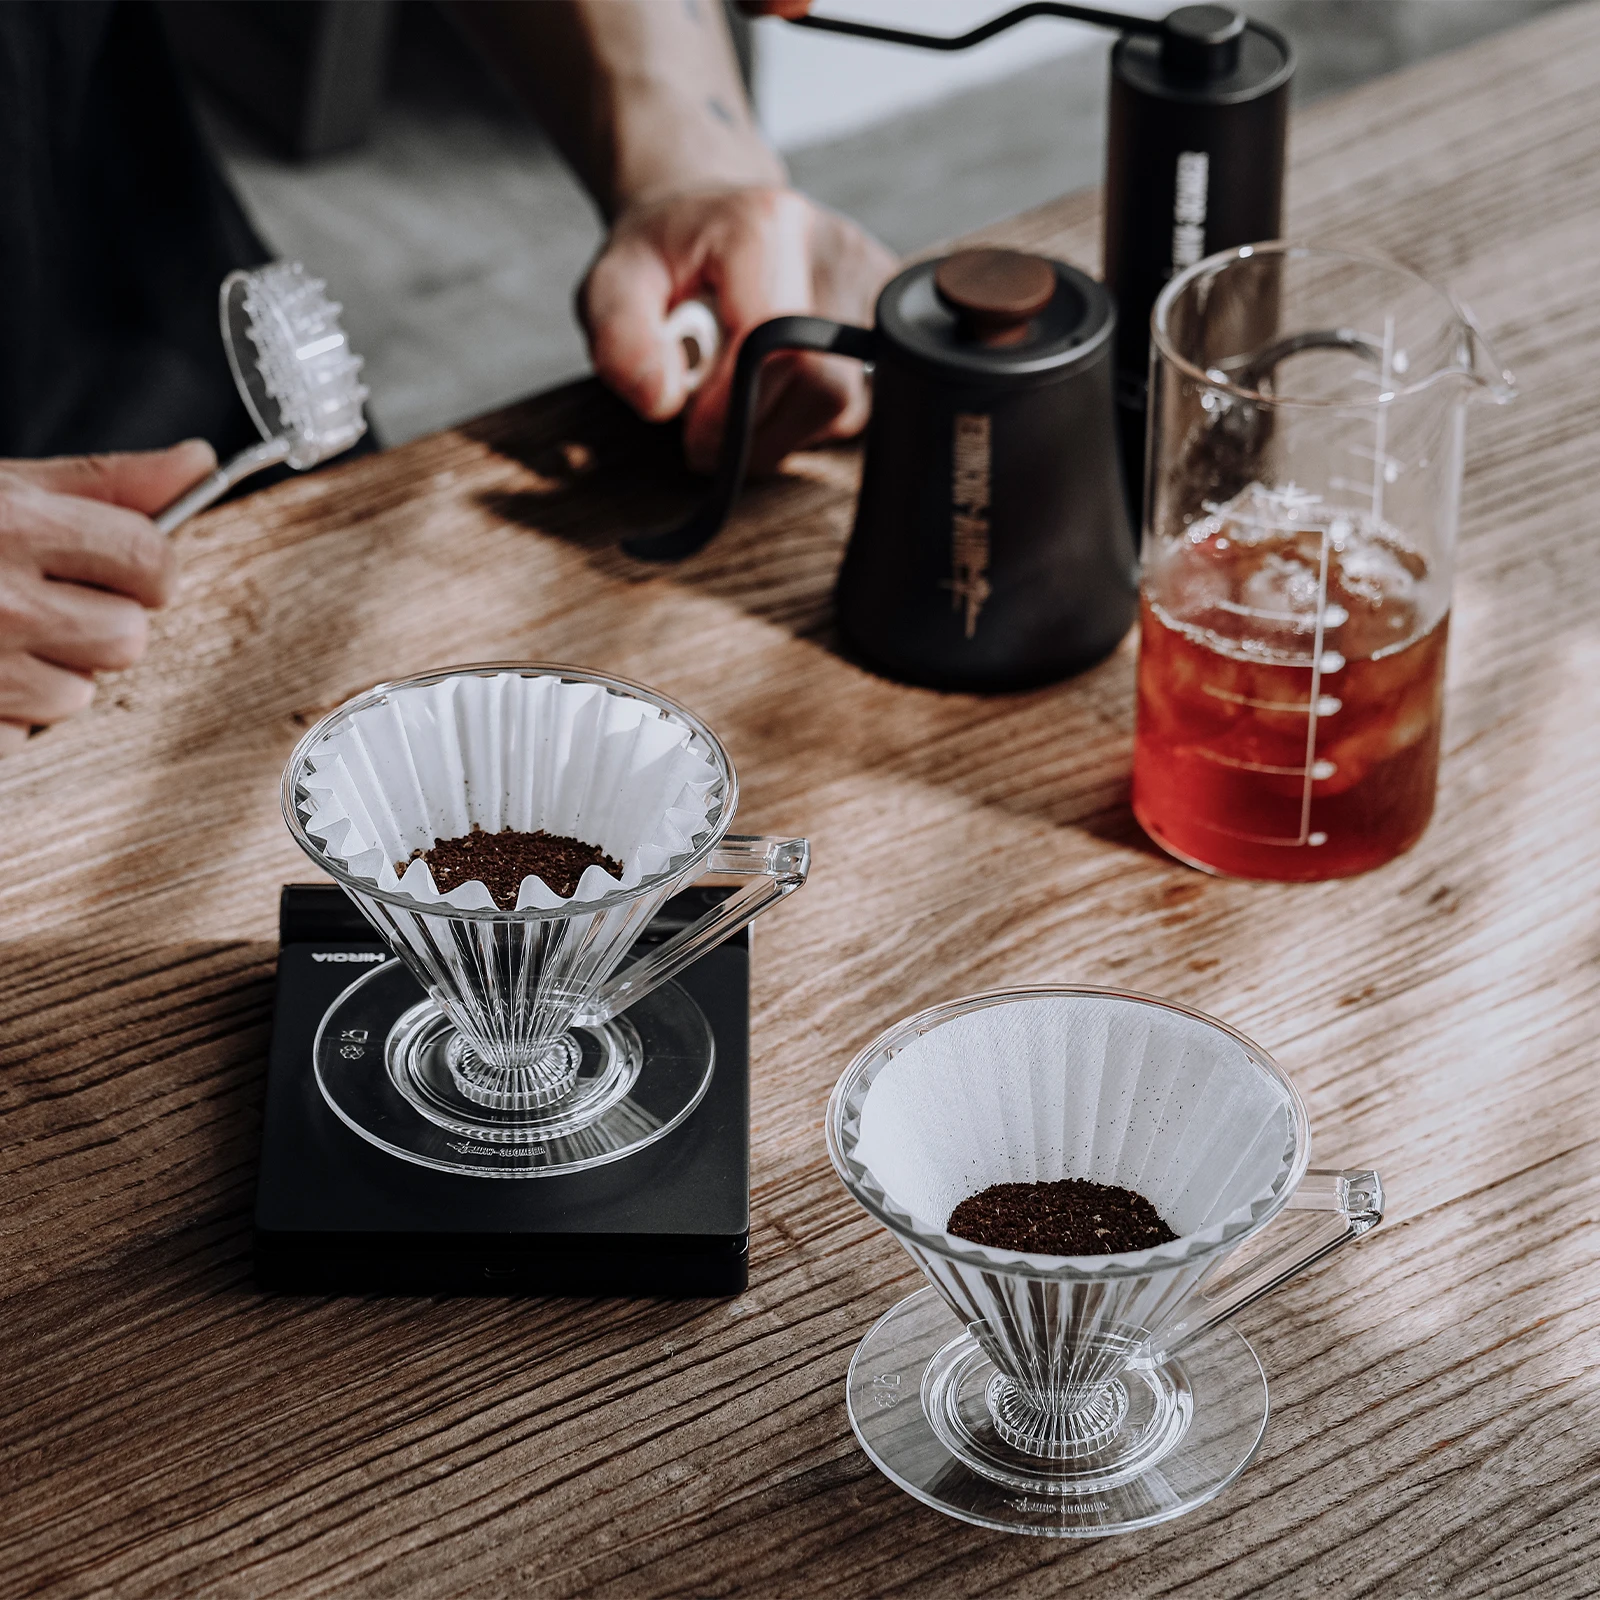 https://ae01.alicdn.com/kf/S0428797d9320419fb708aca35ebf85d1O/MHW-3BOMBER-Filter-Coffee-Cup-With-Handle-Delicate-Espresso-Filters-Drip-Filter-Cups-Fashion-Cafe-Accessories.jpg